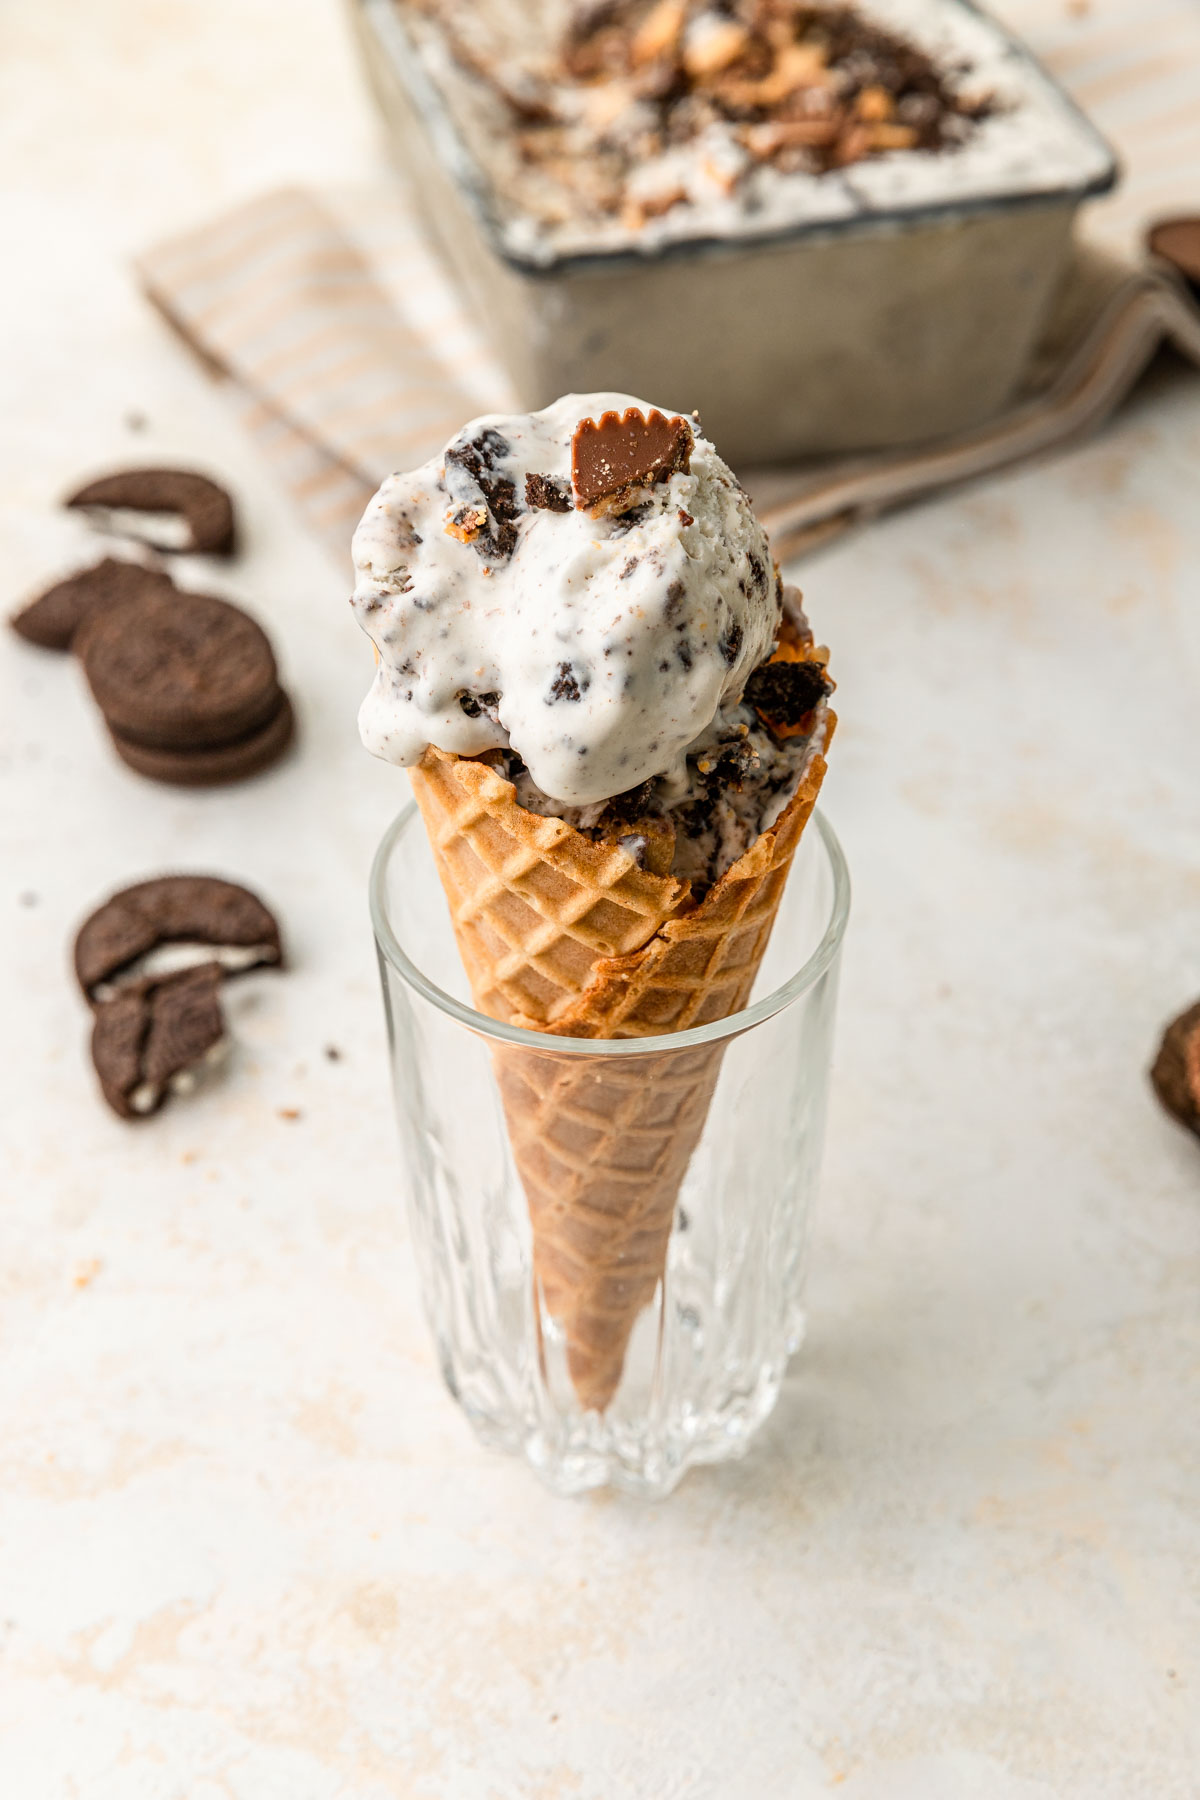 Oreo ice cream cone in a glass with Oreo's in the background.